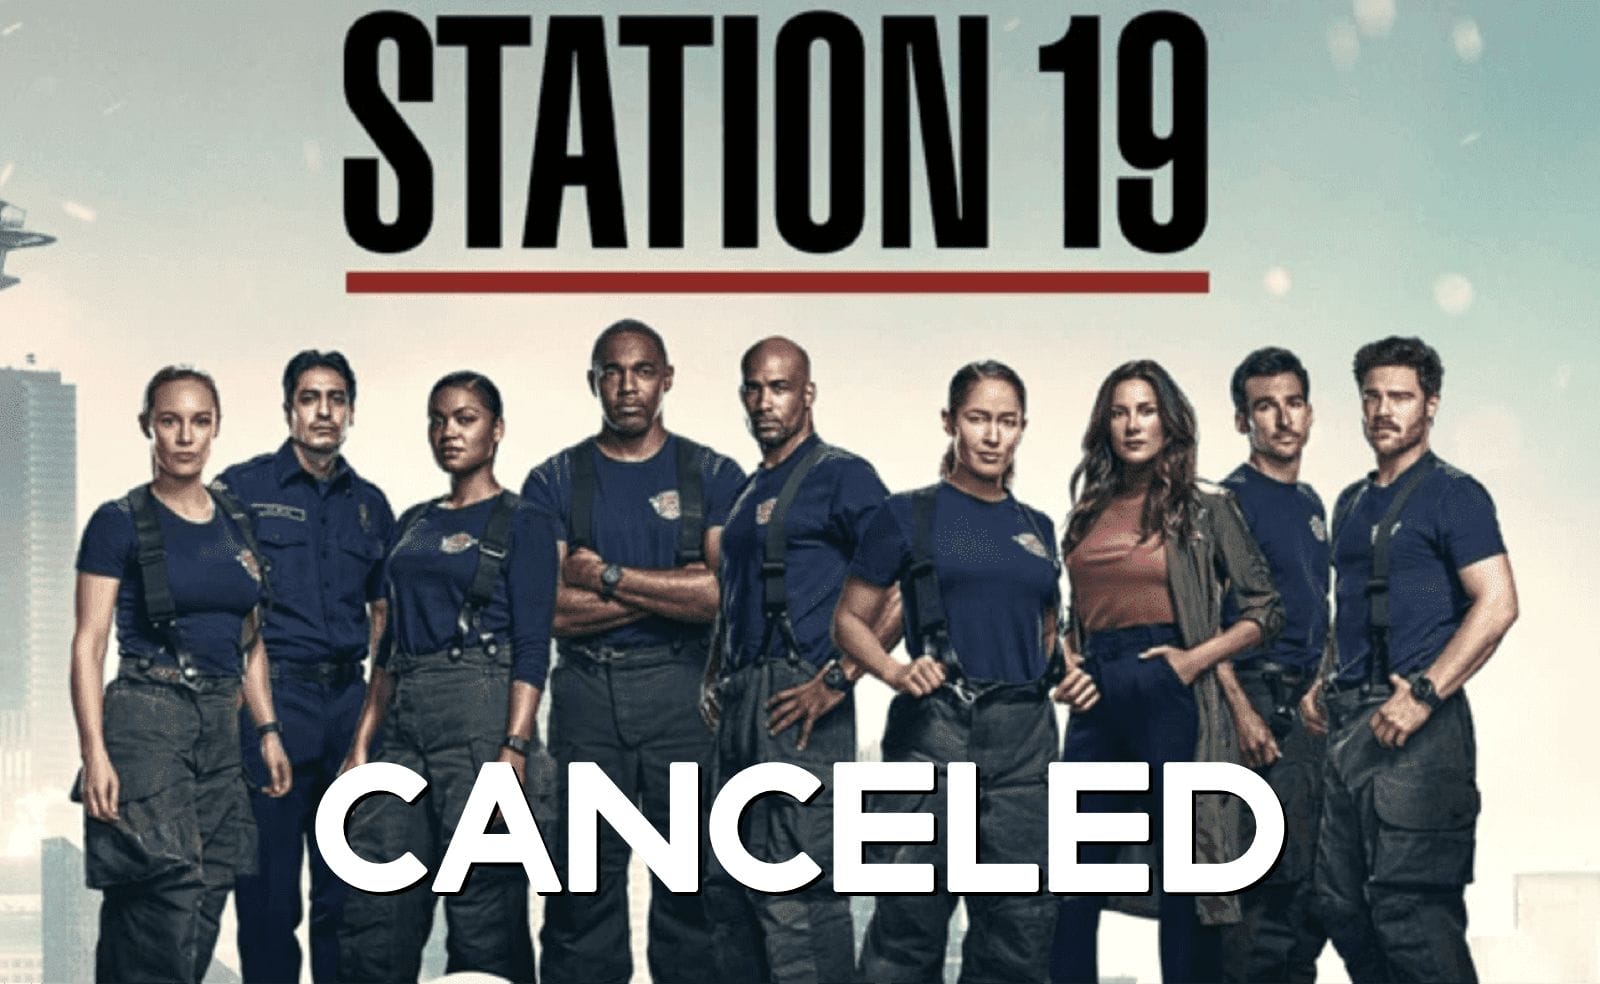 Station 19 Cancelled on ABC